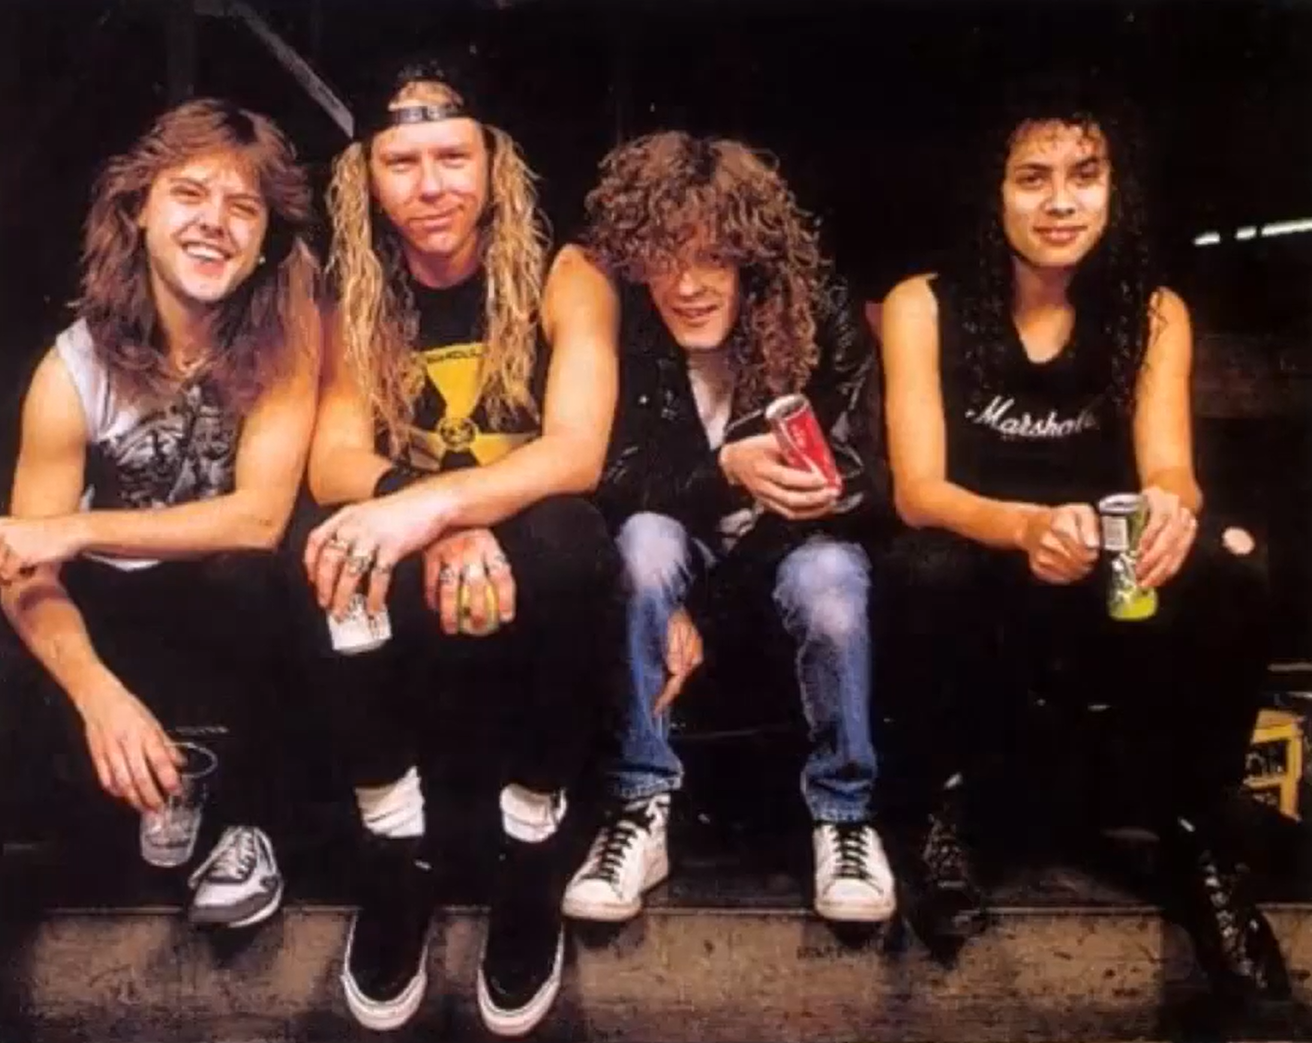 Metallica members holding the beverages and sitting on the stairs